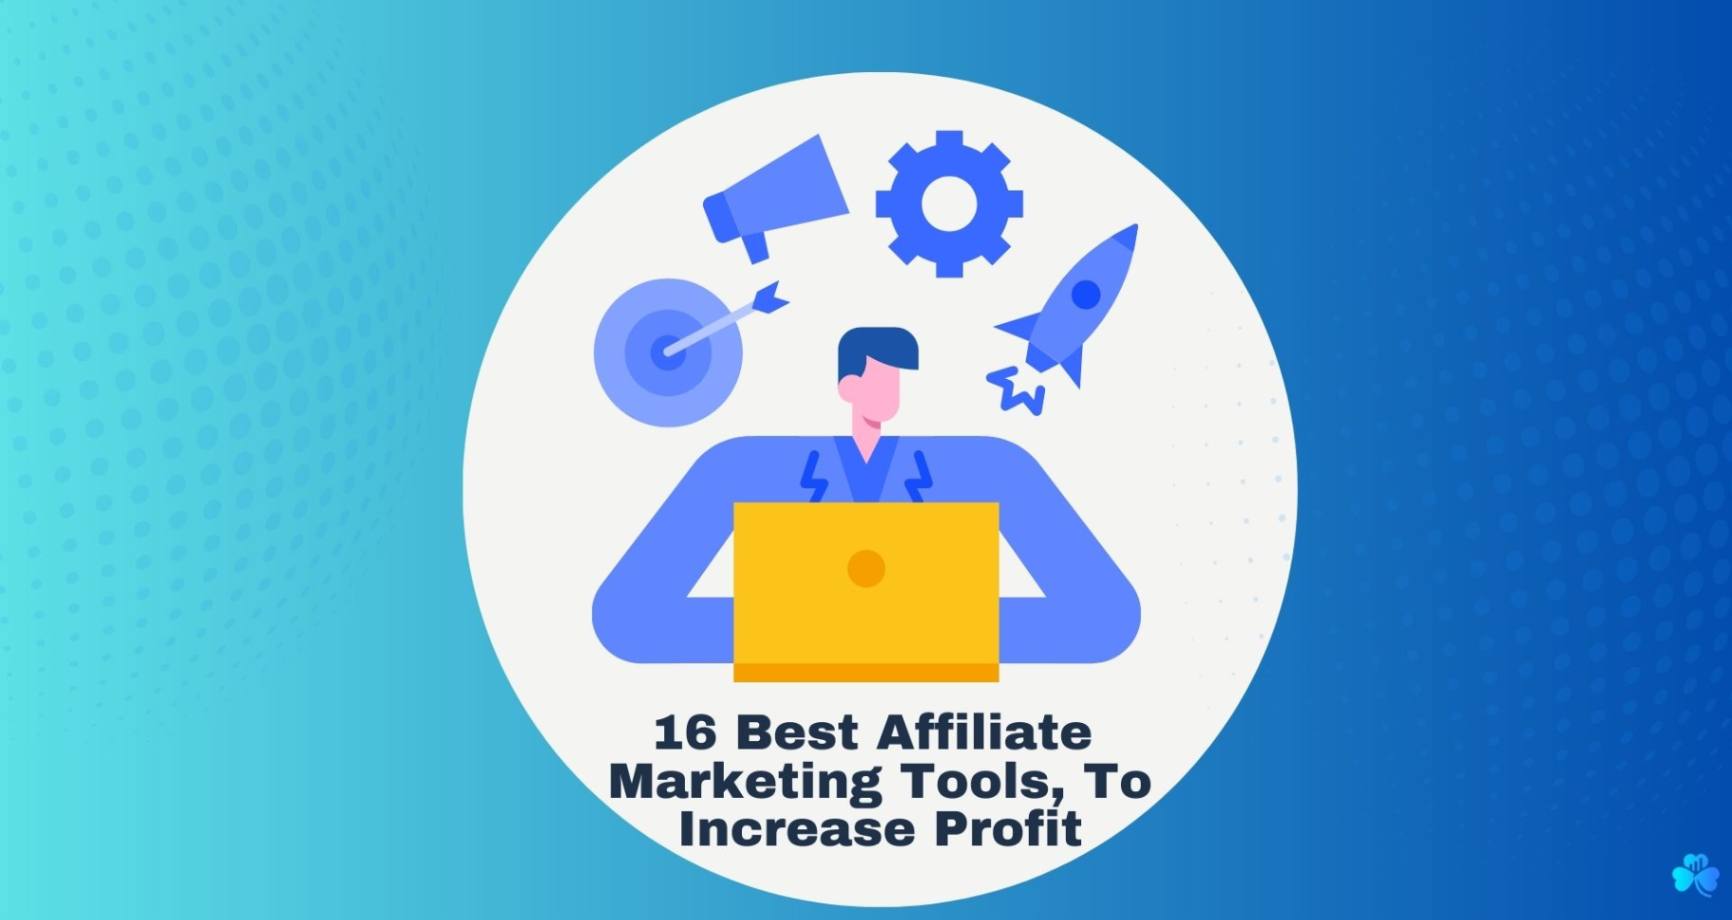 16 Best Affiliate Marketing Tools, To Increase Profit